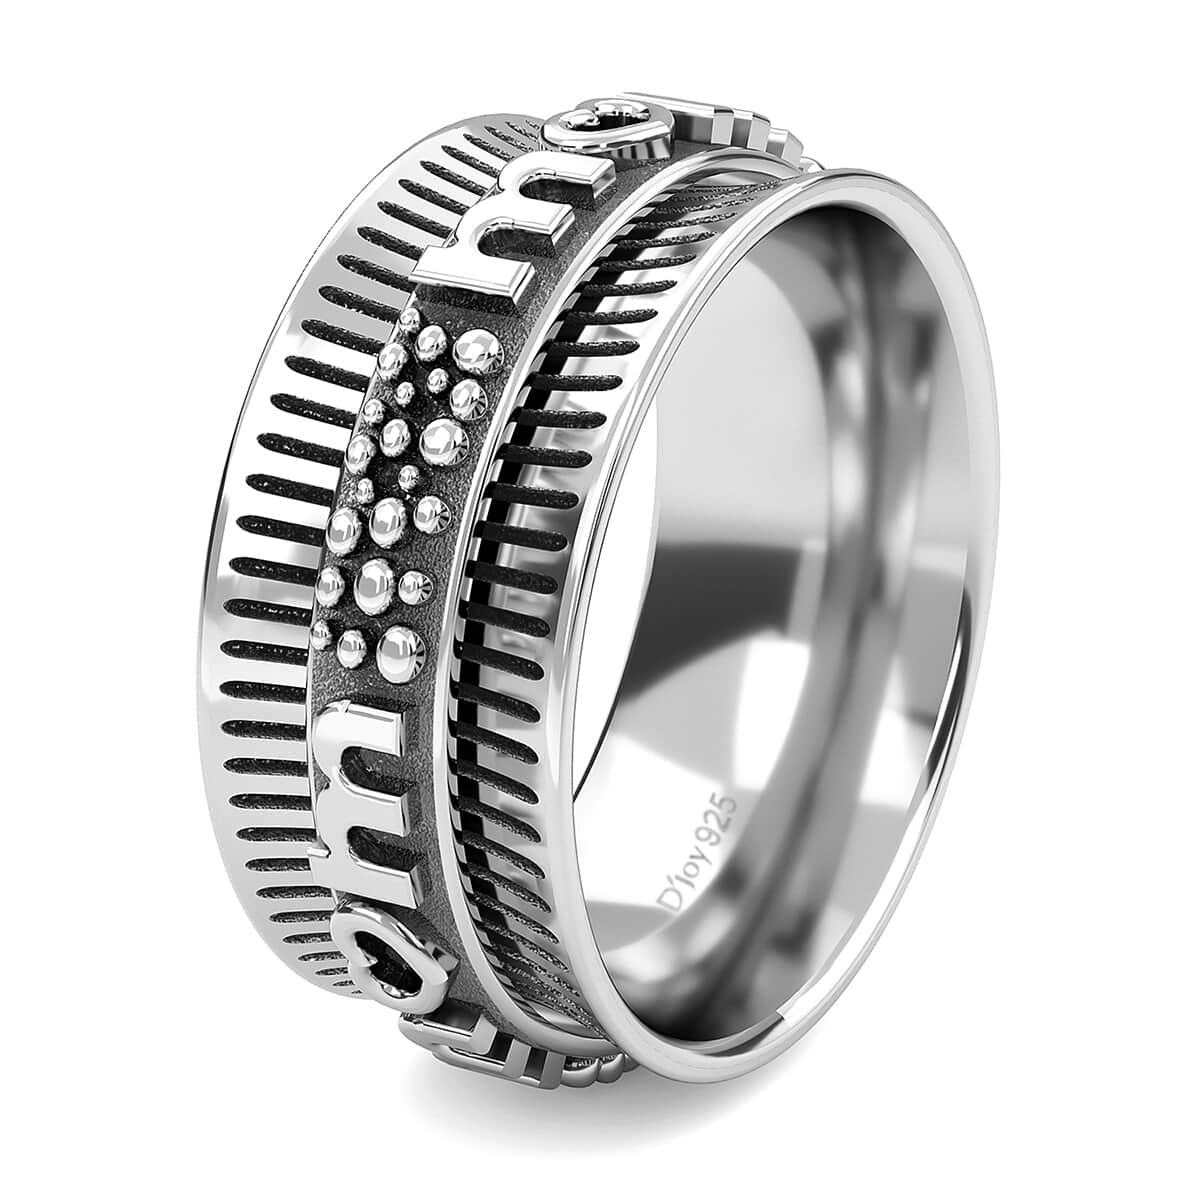 Sterling Silver Spinner Ring|Fidget Rings for Anxiety|Stress Relieving Anxiety Ring Band 5.60 grams (Size 10) image number 4